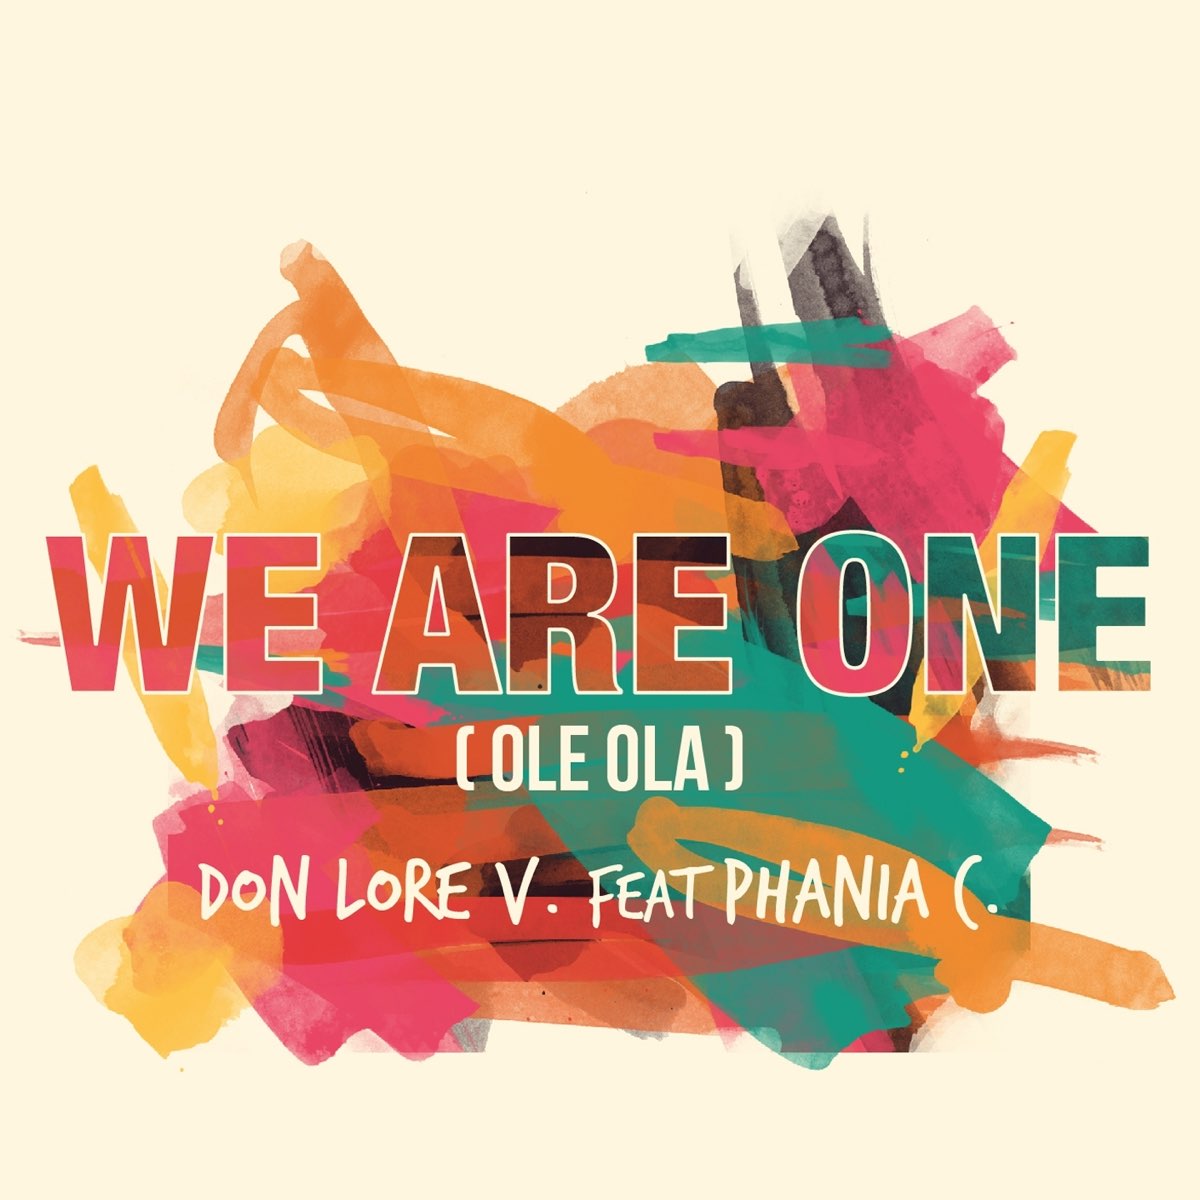 We are one. We are one ole Ola. Don Lore v. We are one ole Ola текст. Lore v